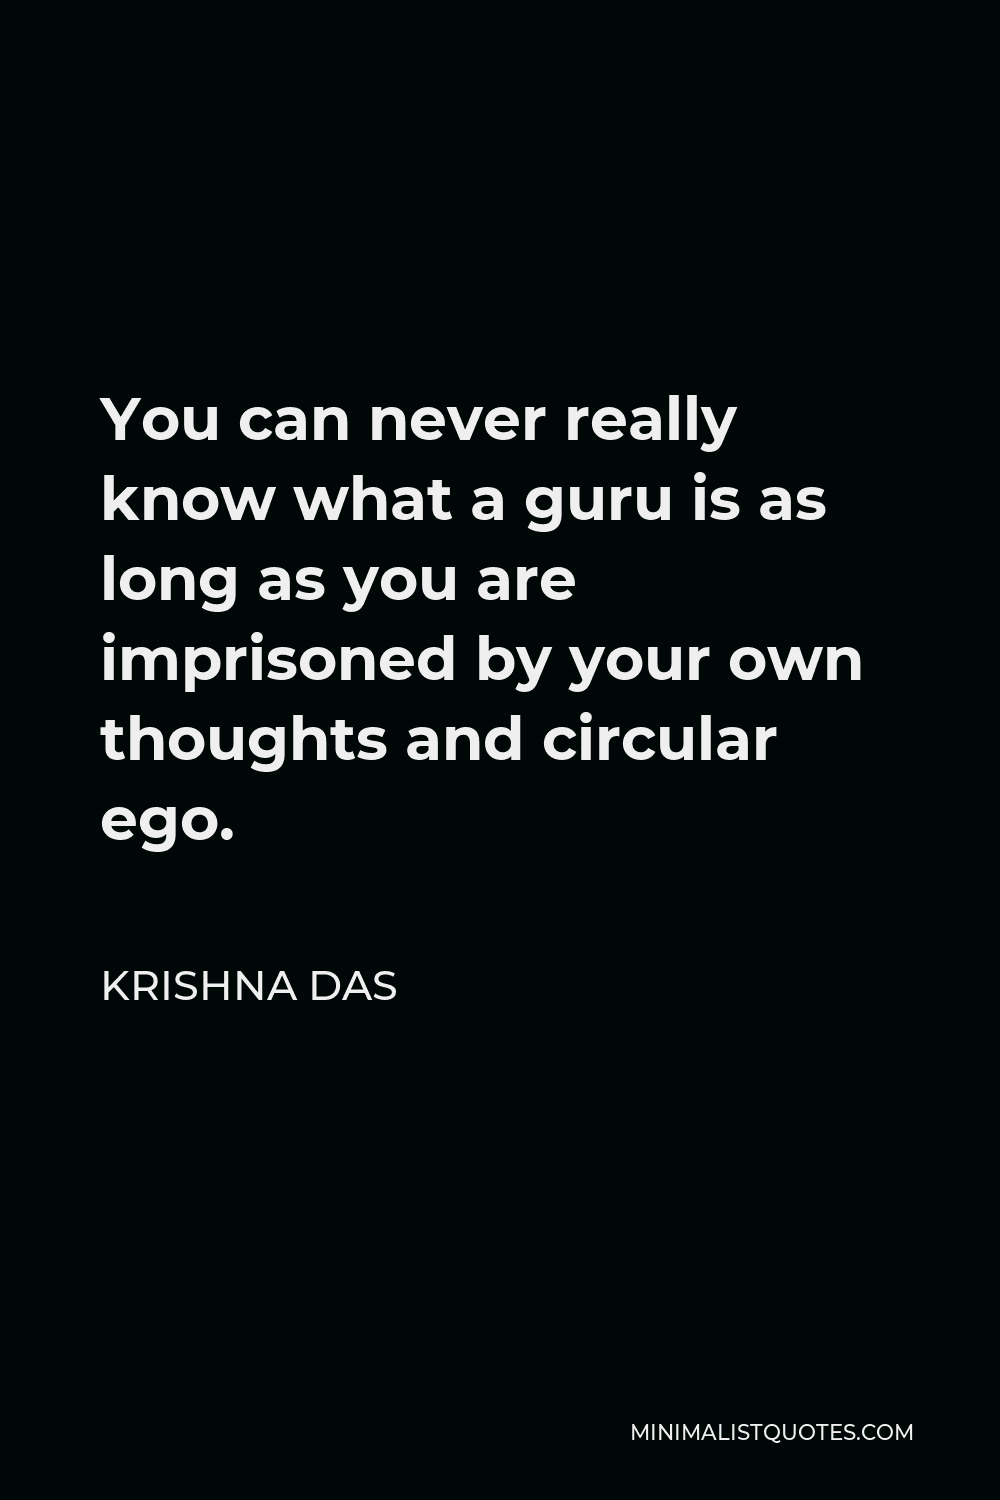 Krishna Das Quote - You can never really know what a guru is as long as you are imprisoned by your own thoughts and circular ego.